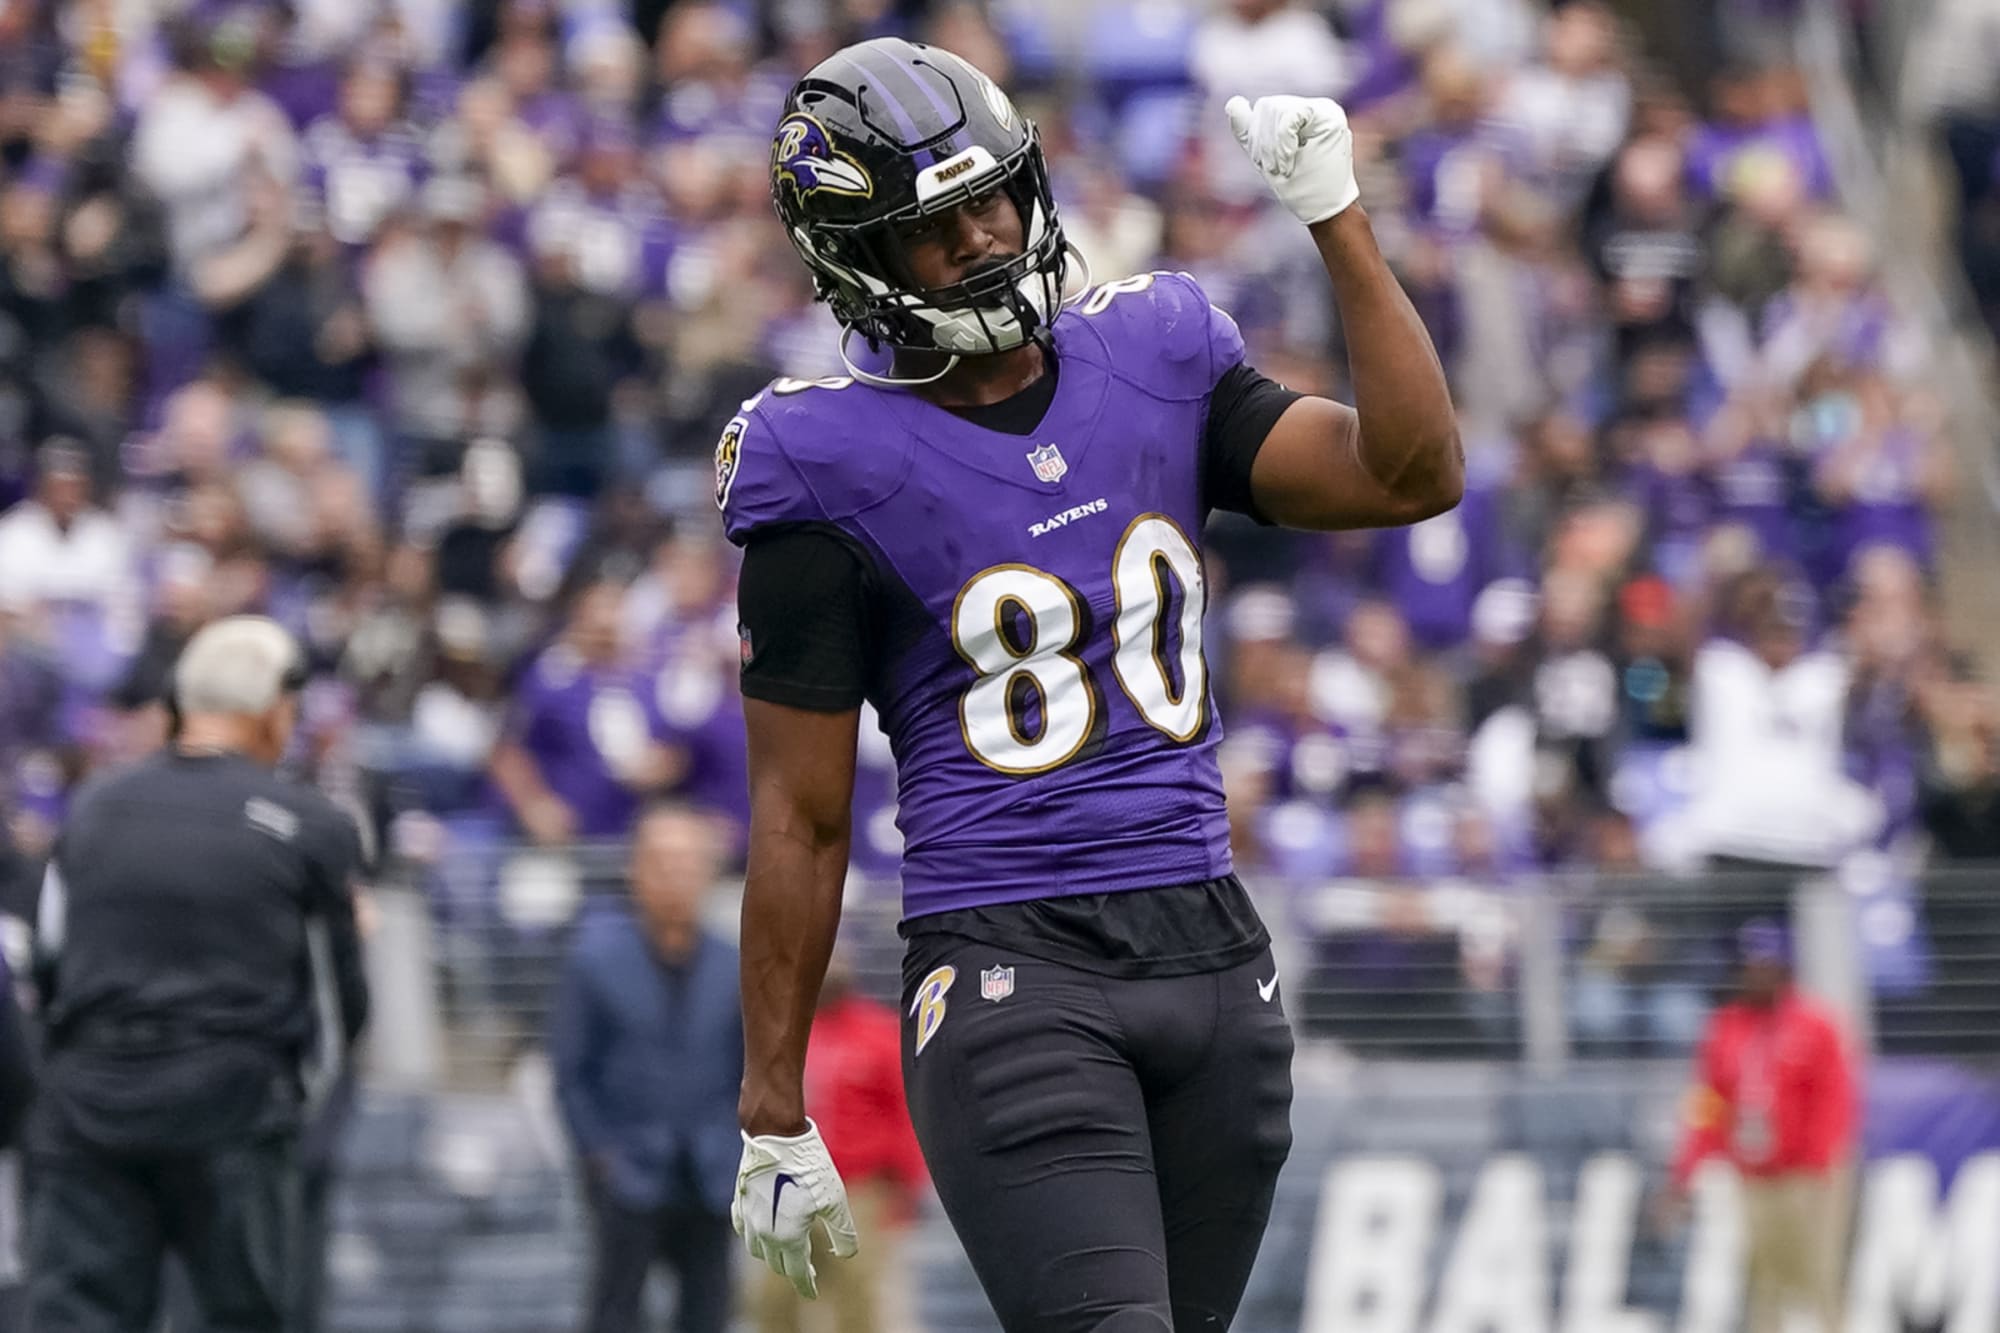 Isaiah Likely has earned a prominent role in the Ravens offense